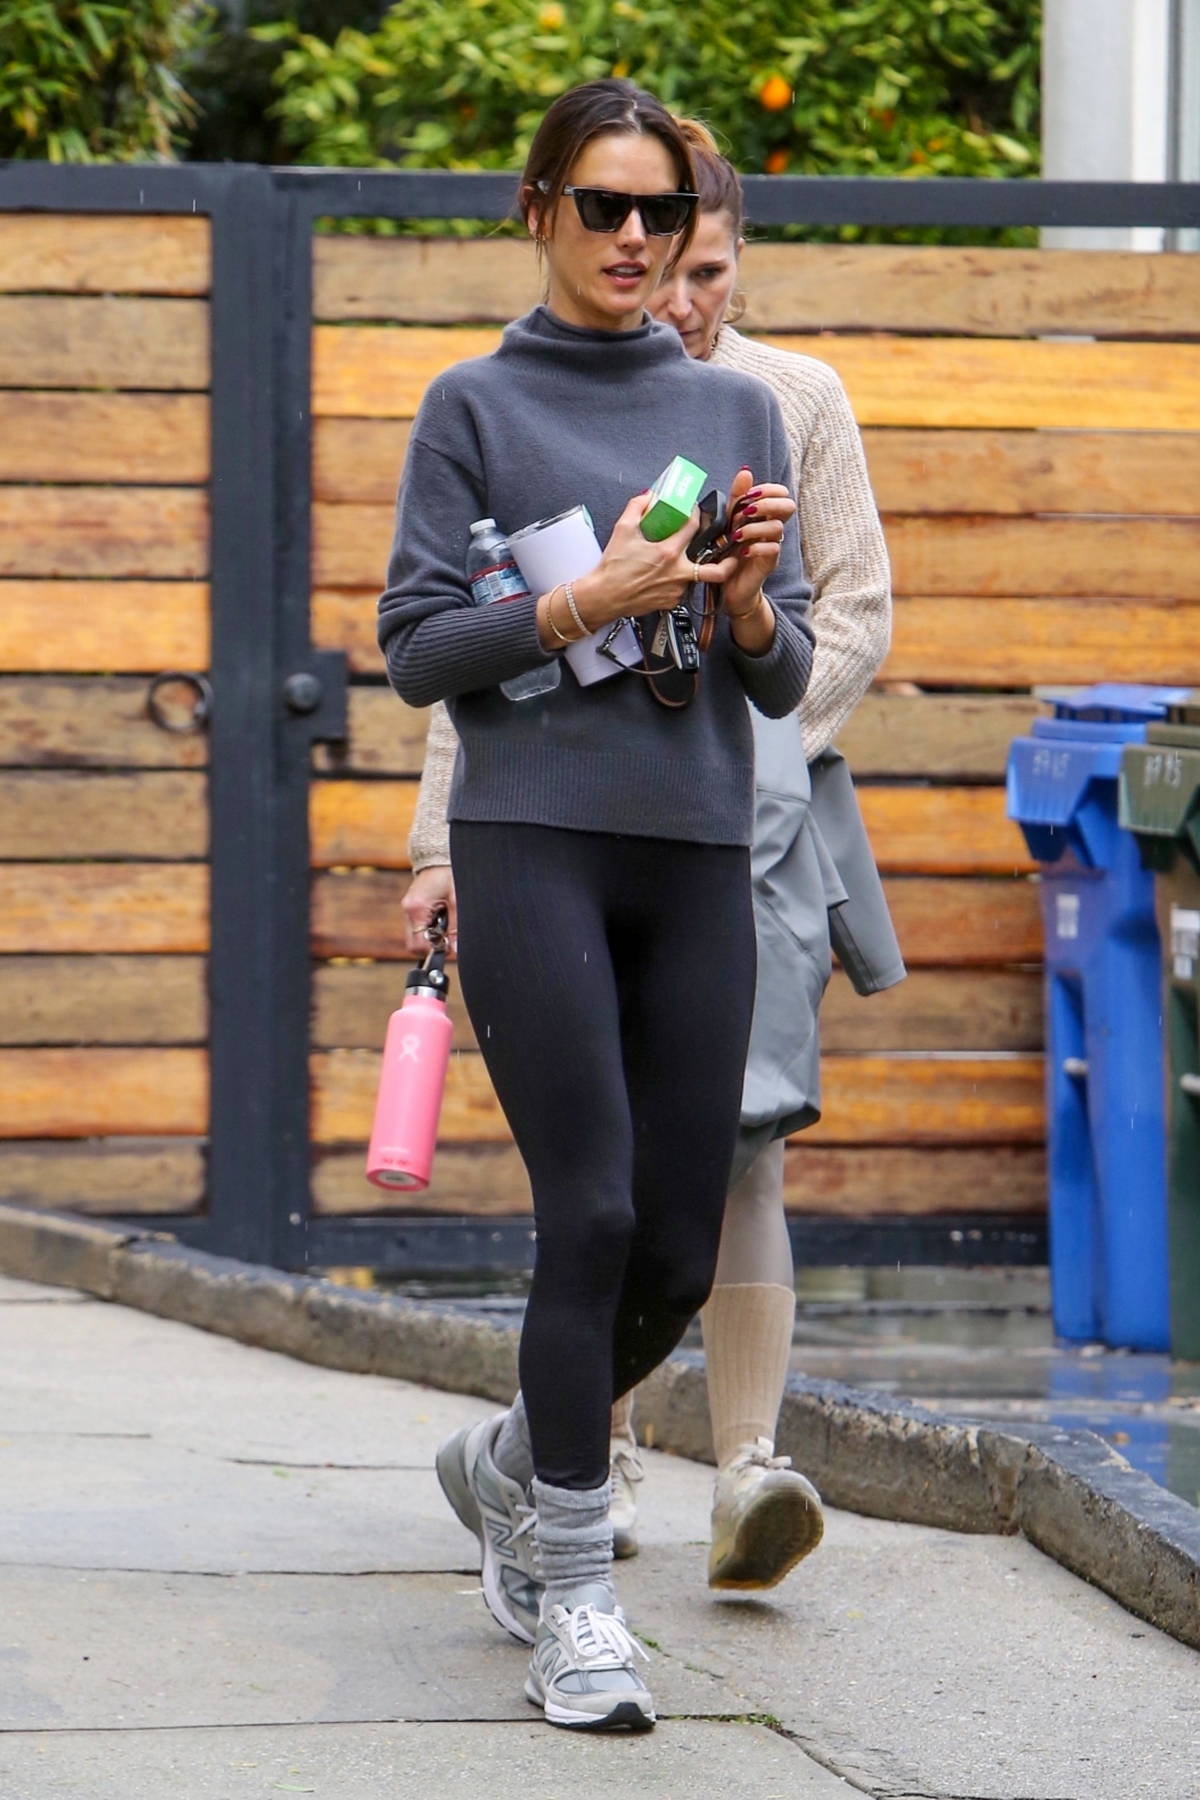 Bella Hadid shows off her perfectly toned figure in all-black sports bra and  leggings as